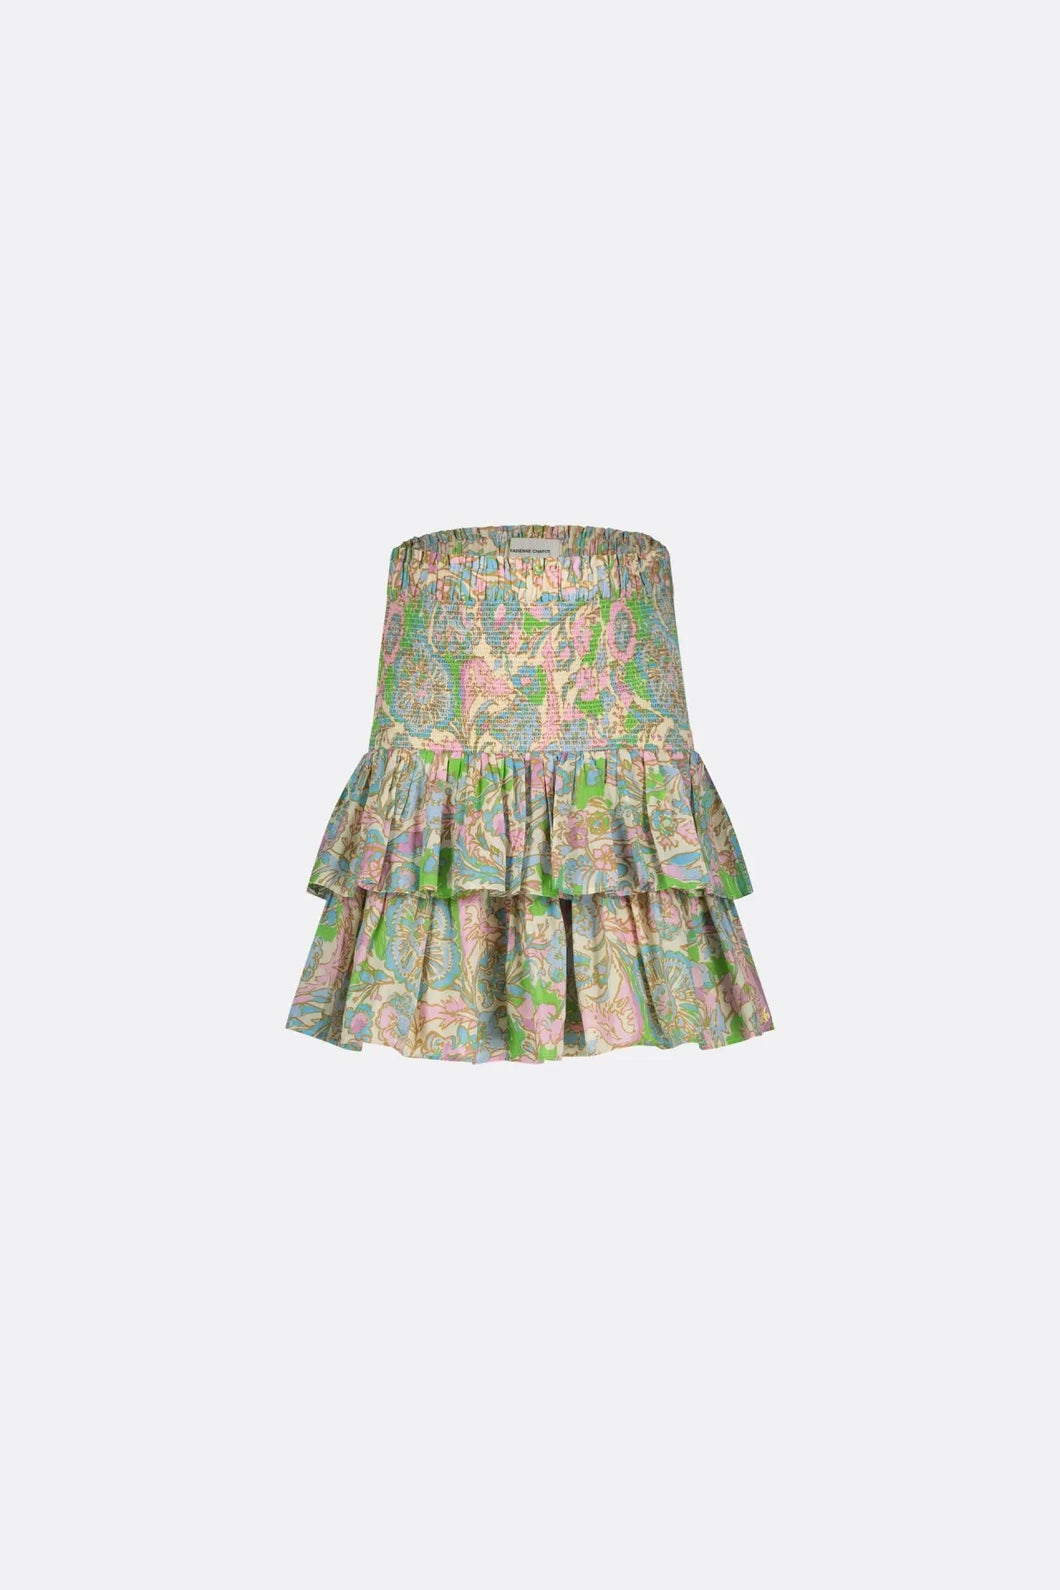 Fabienne Chapot Mary Skirt - Acapulco Pink